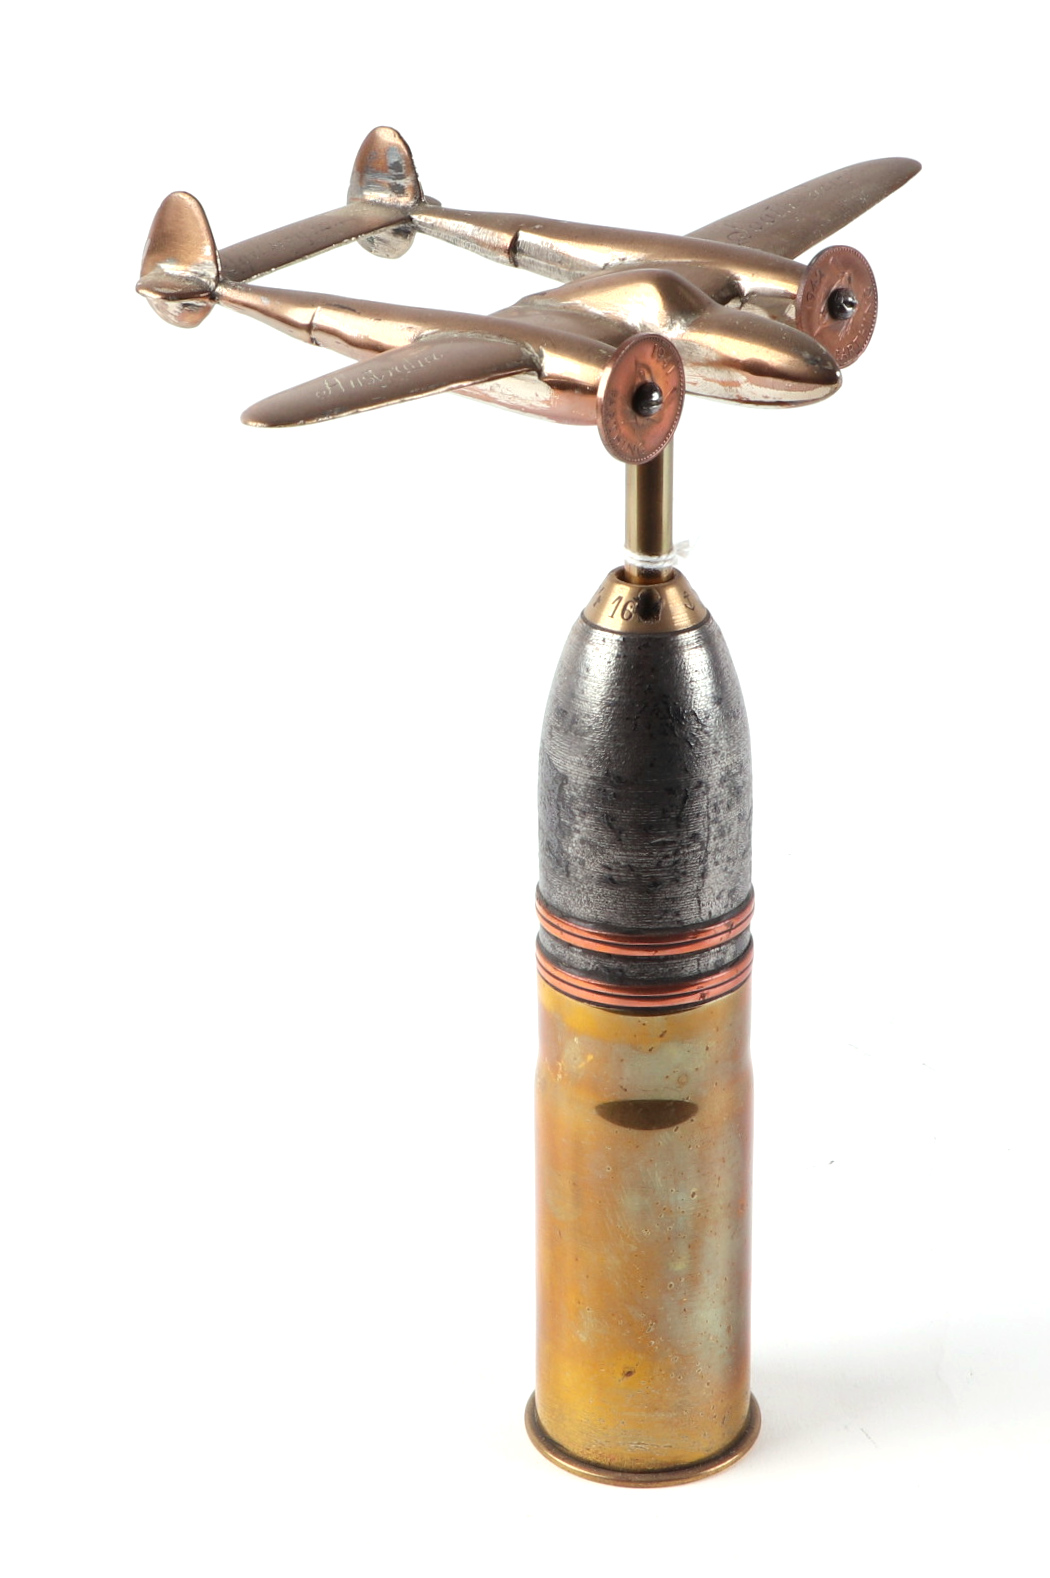 A trench art cast brass model of a Lockheed P-38 Lighting, mounted on a shell case, wingspan 16cm.